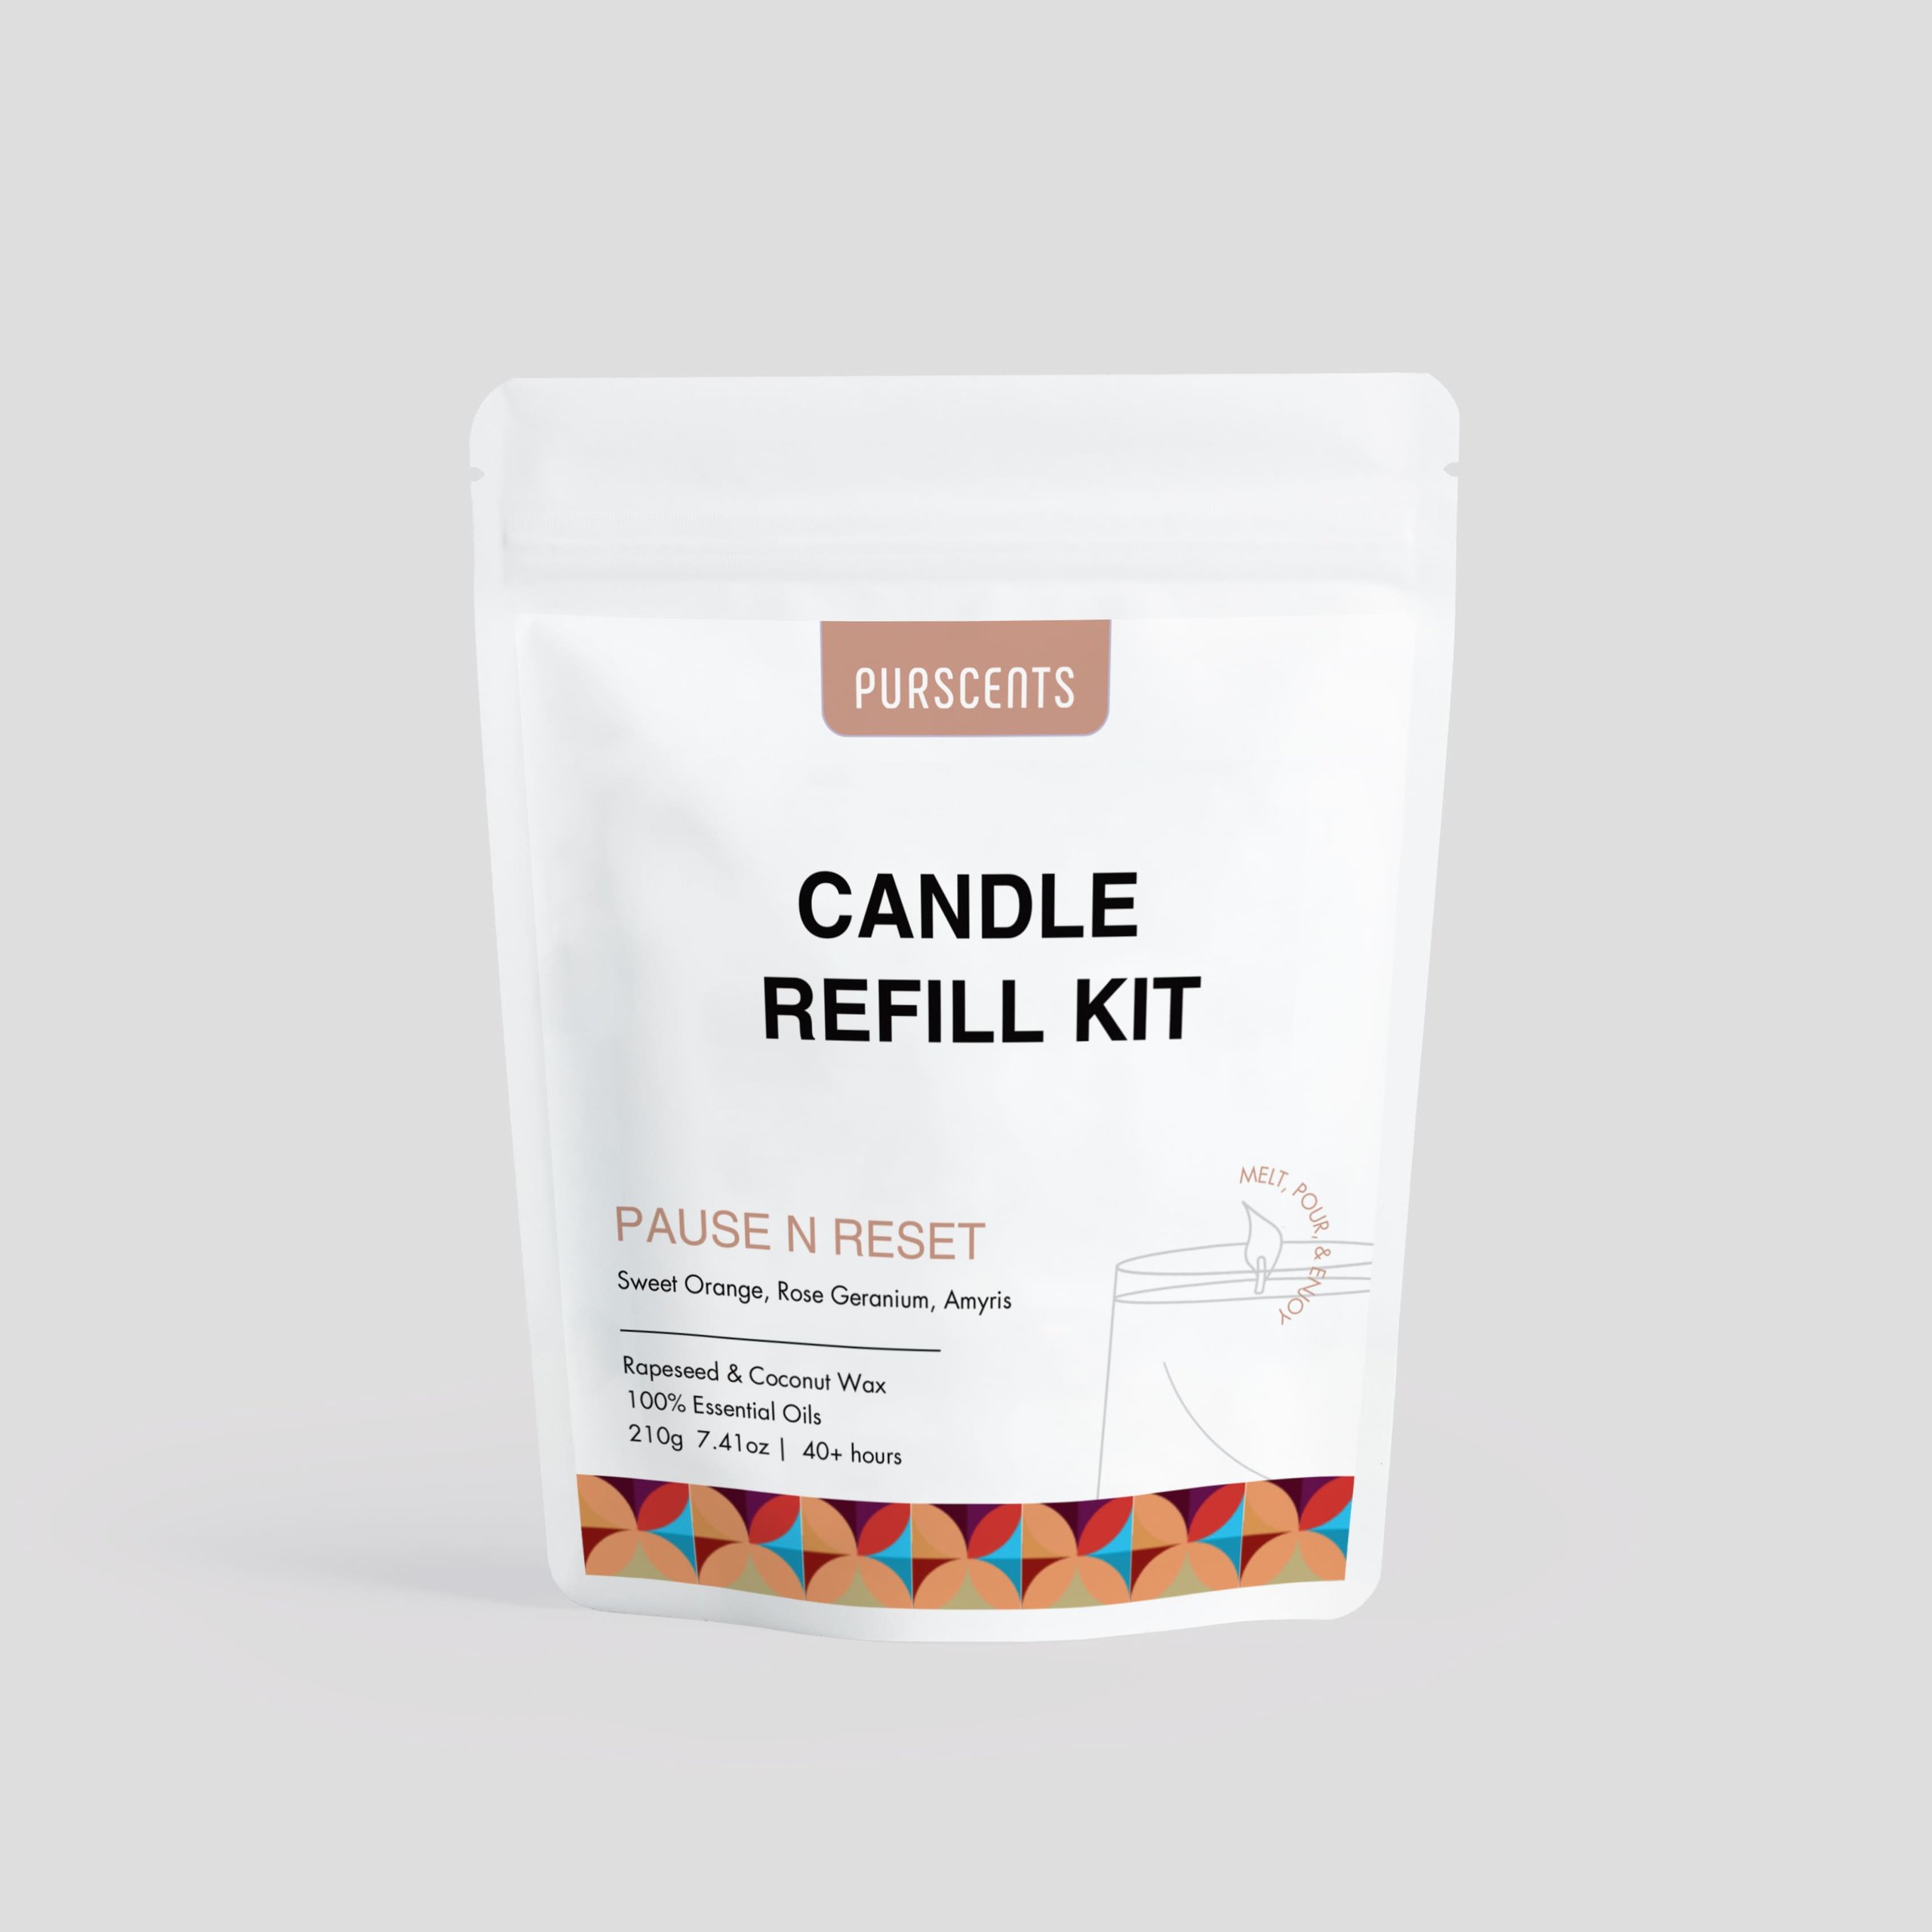 Pause N Reset Candle Refill Kit